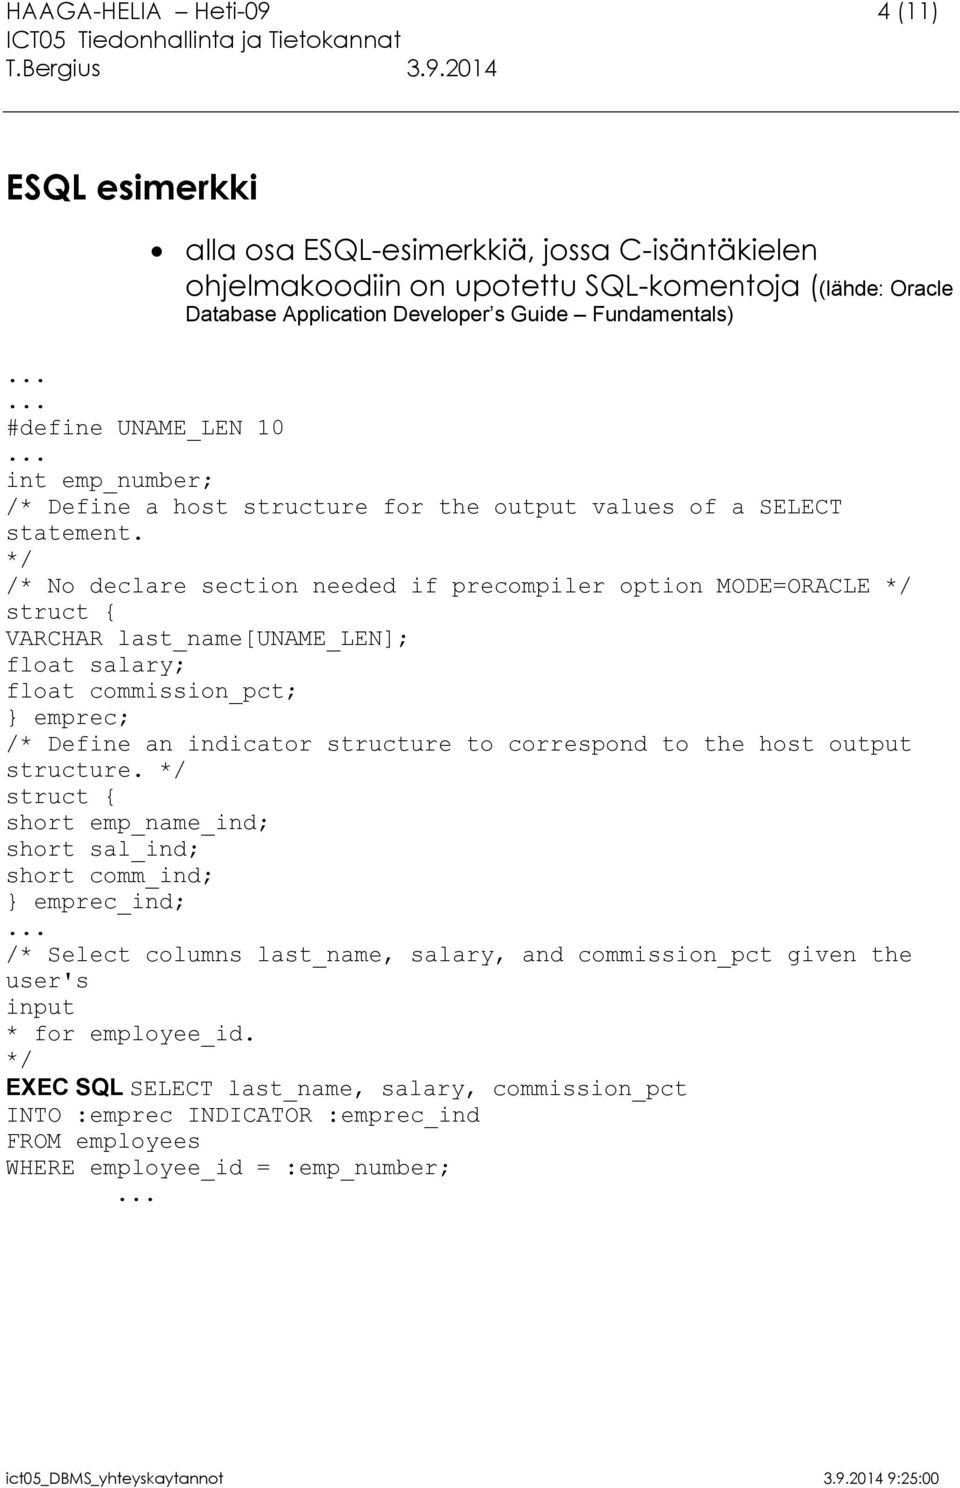 */ /* No declare section needed if precompiler option MODE=ORACLE */ struct { VARCHAR last_name[uname_len]; float salary; float commission_pct; } emprec; /* Define an indicator structure to